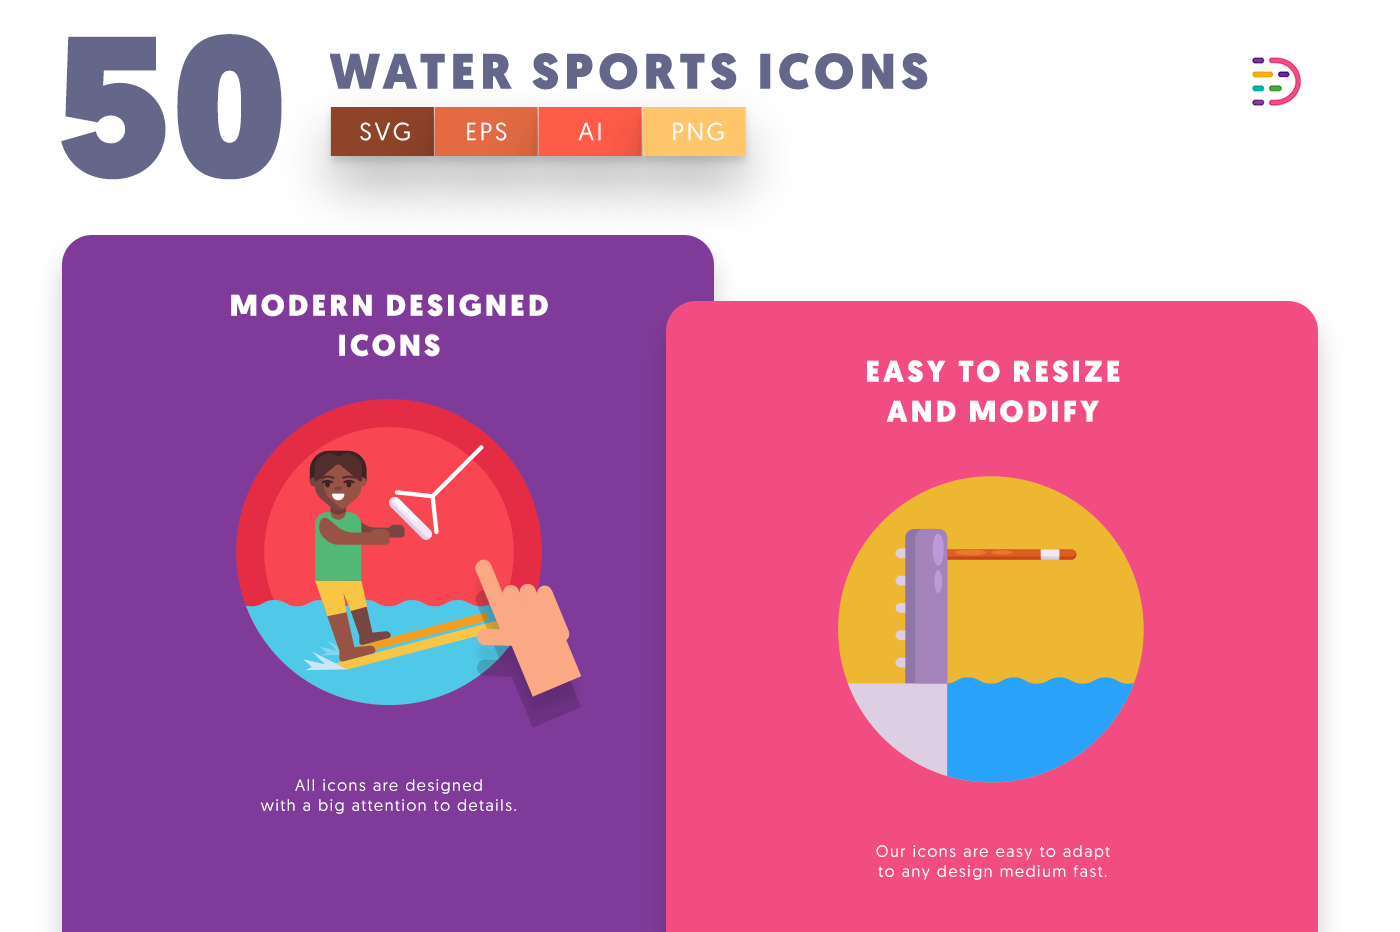 Water Sports icons png/svg/eps